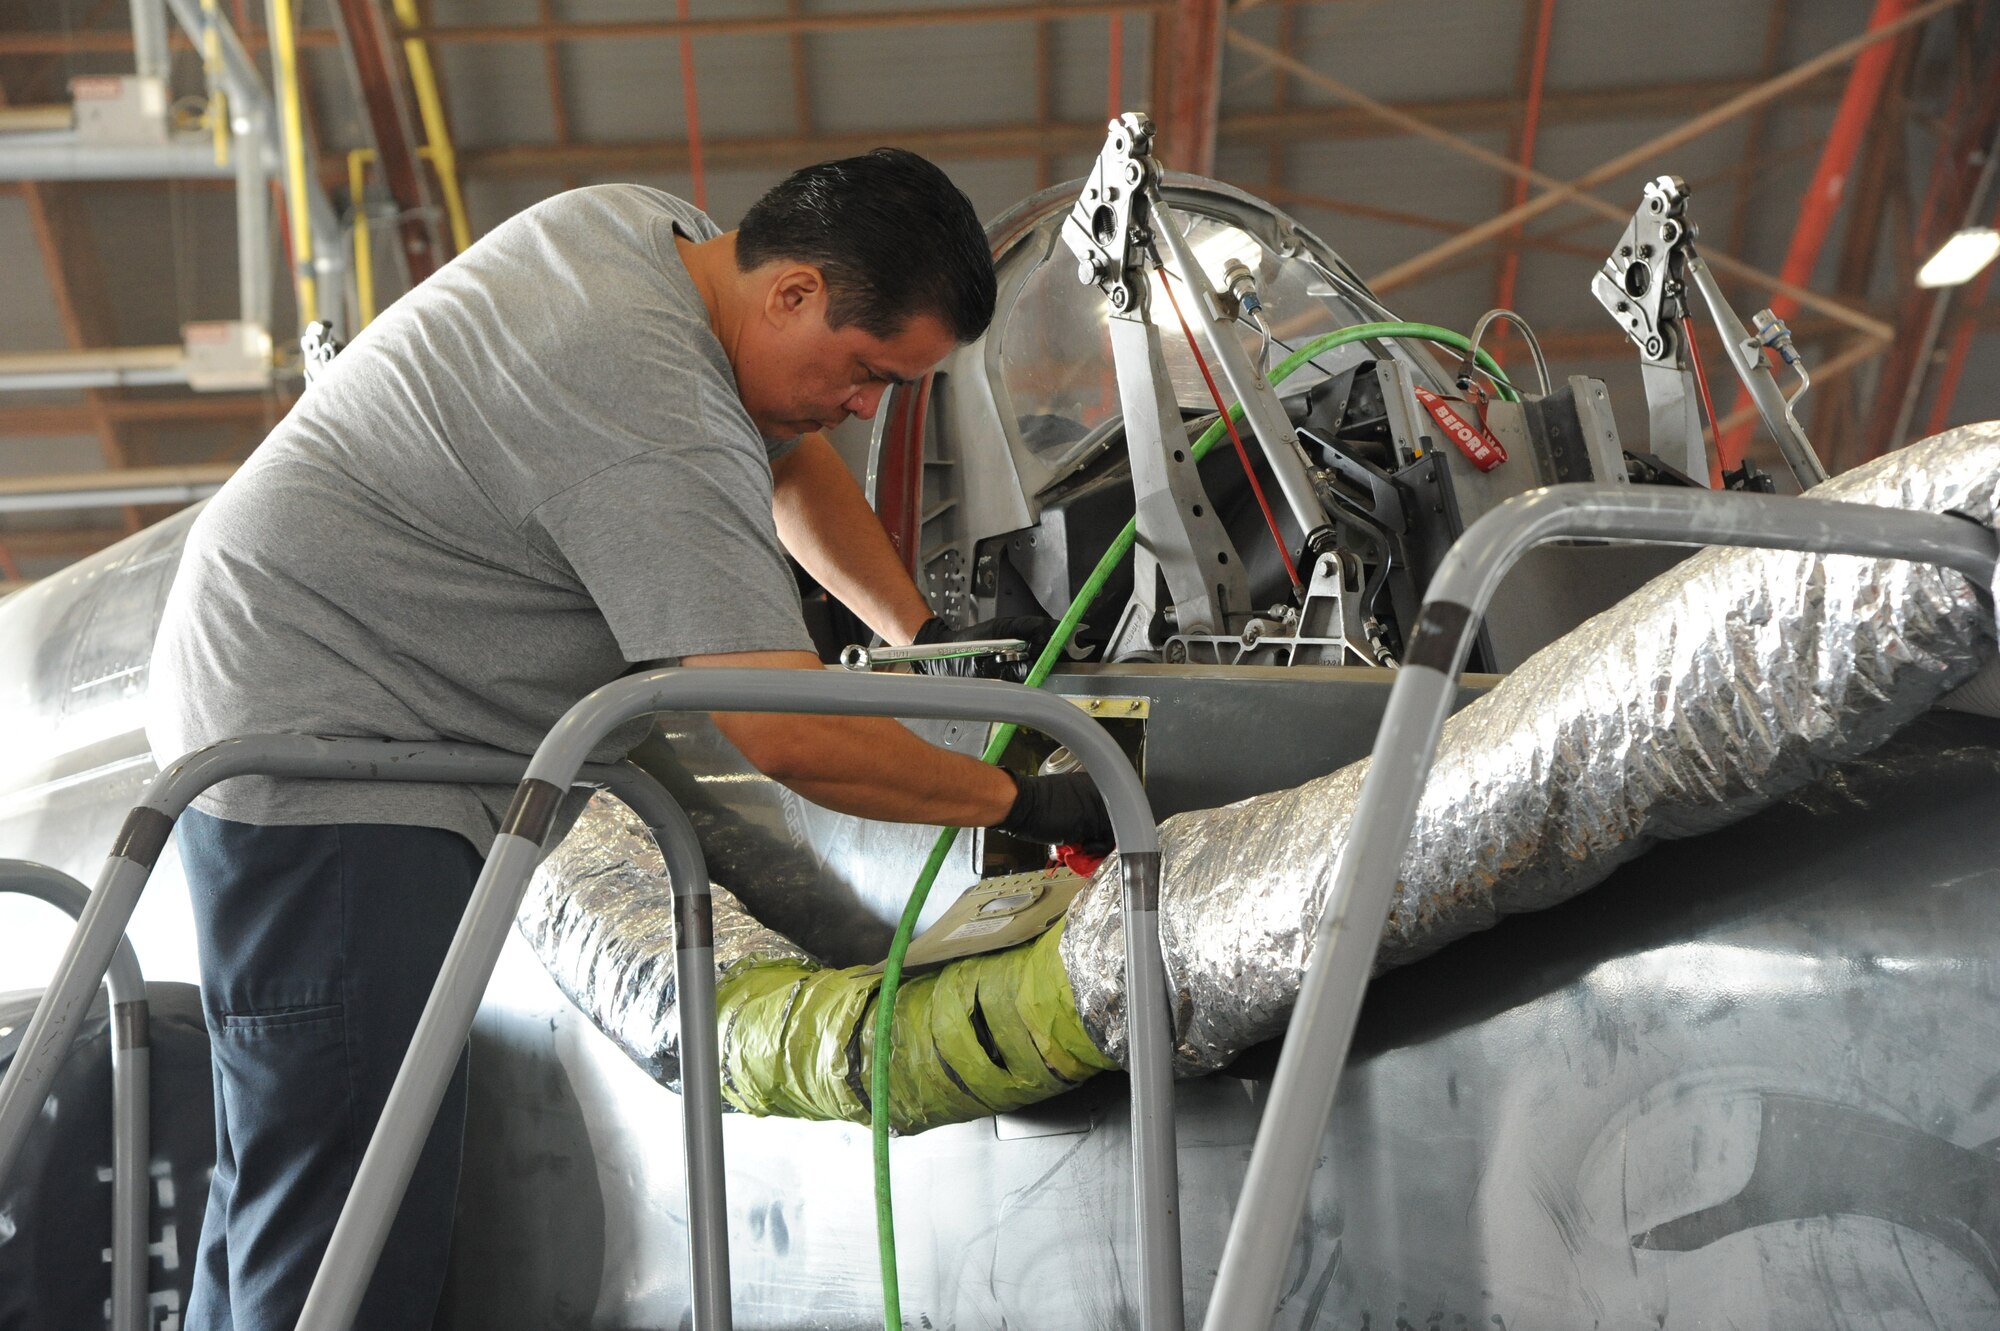 An Aircraft maintainer standing on a platform to conduct maintenance on a T-38 cockpit inside a hangar.